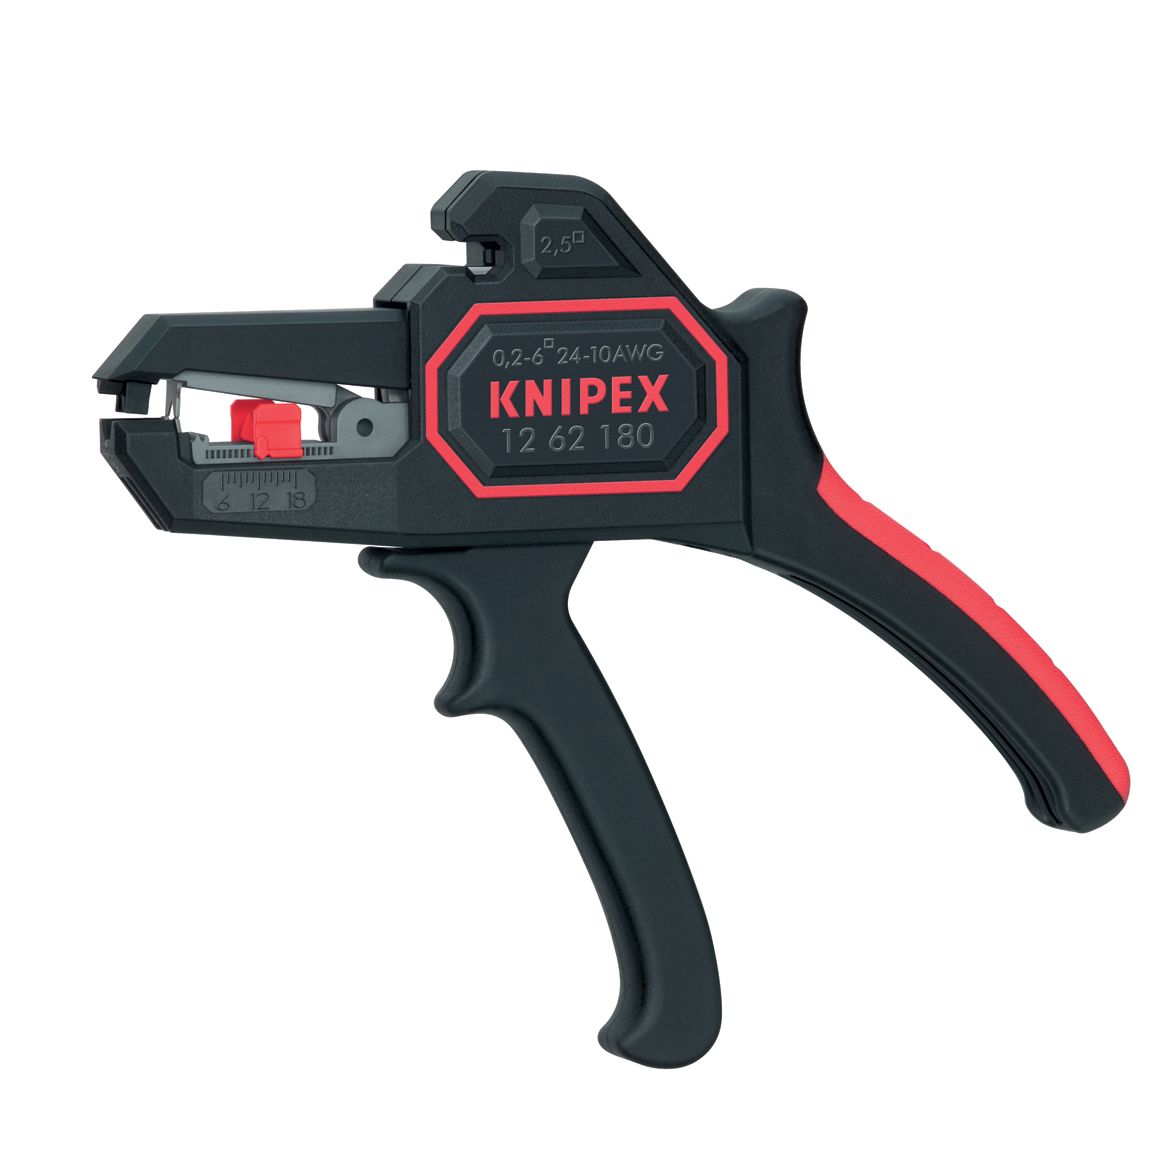 Knipex 7 1/4" Self-adjusting insulation strippers - AWG 10-24